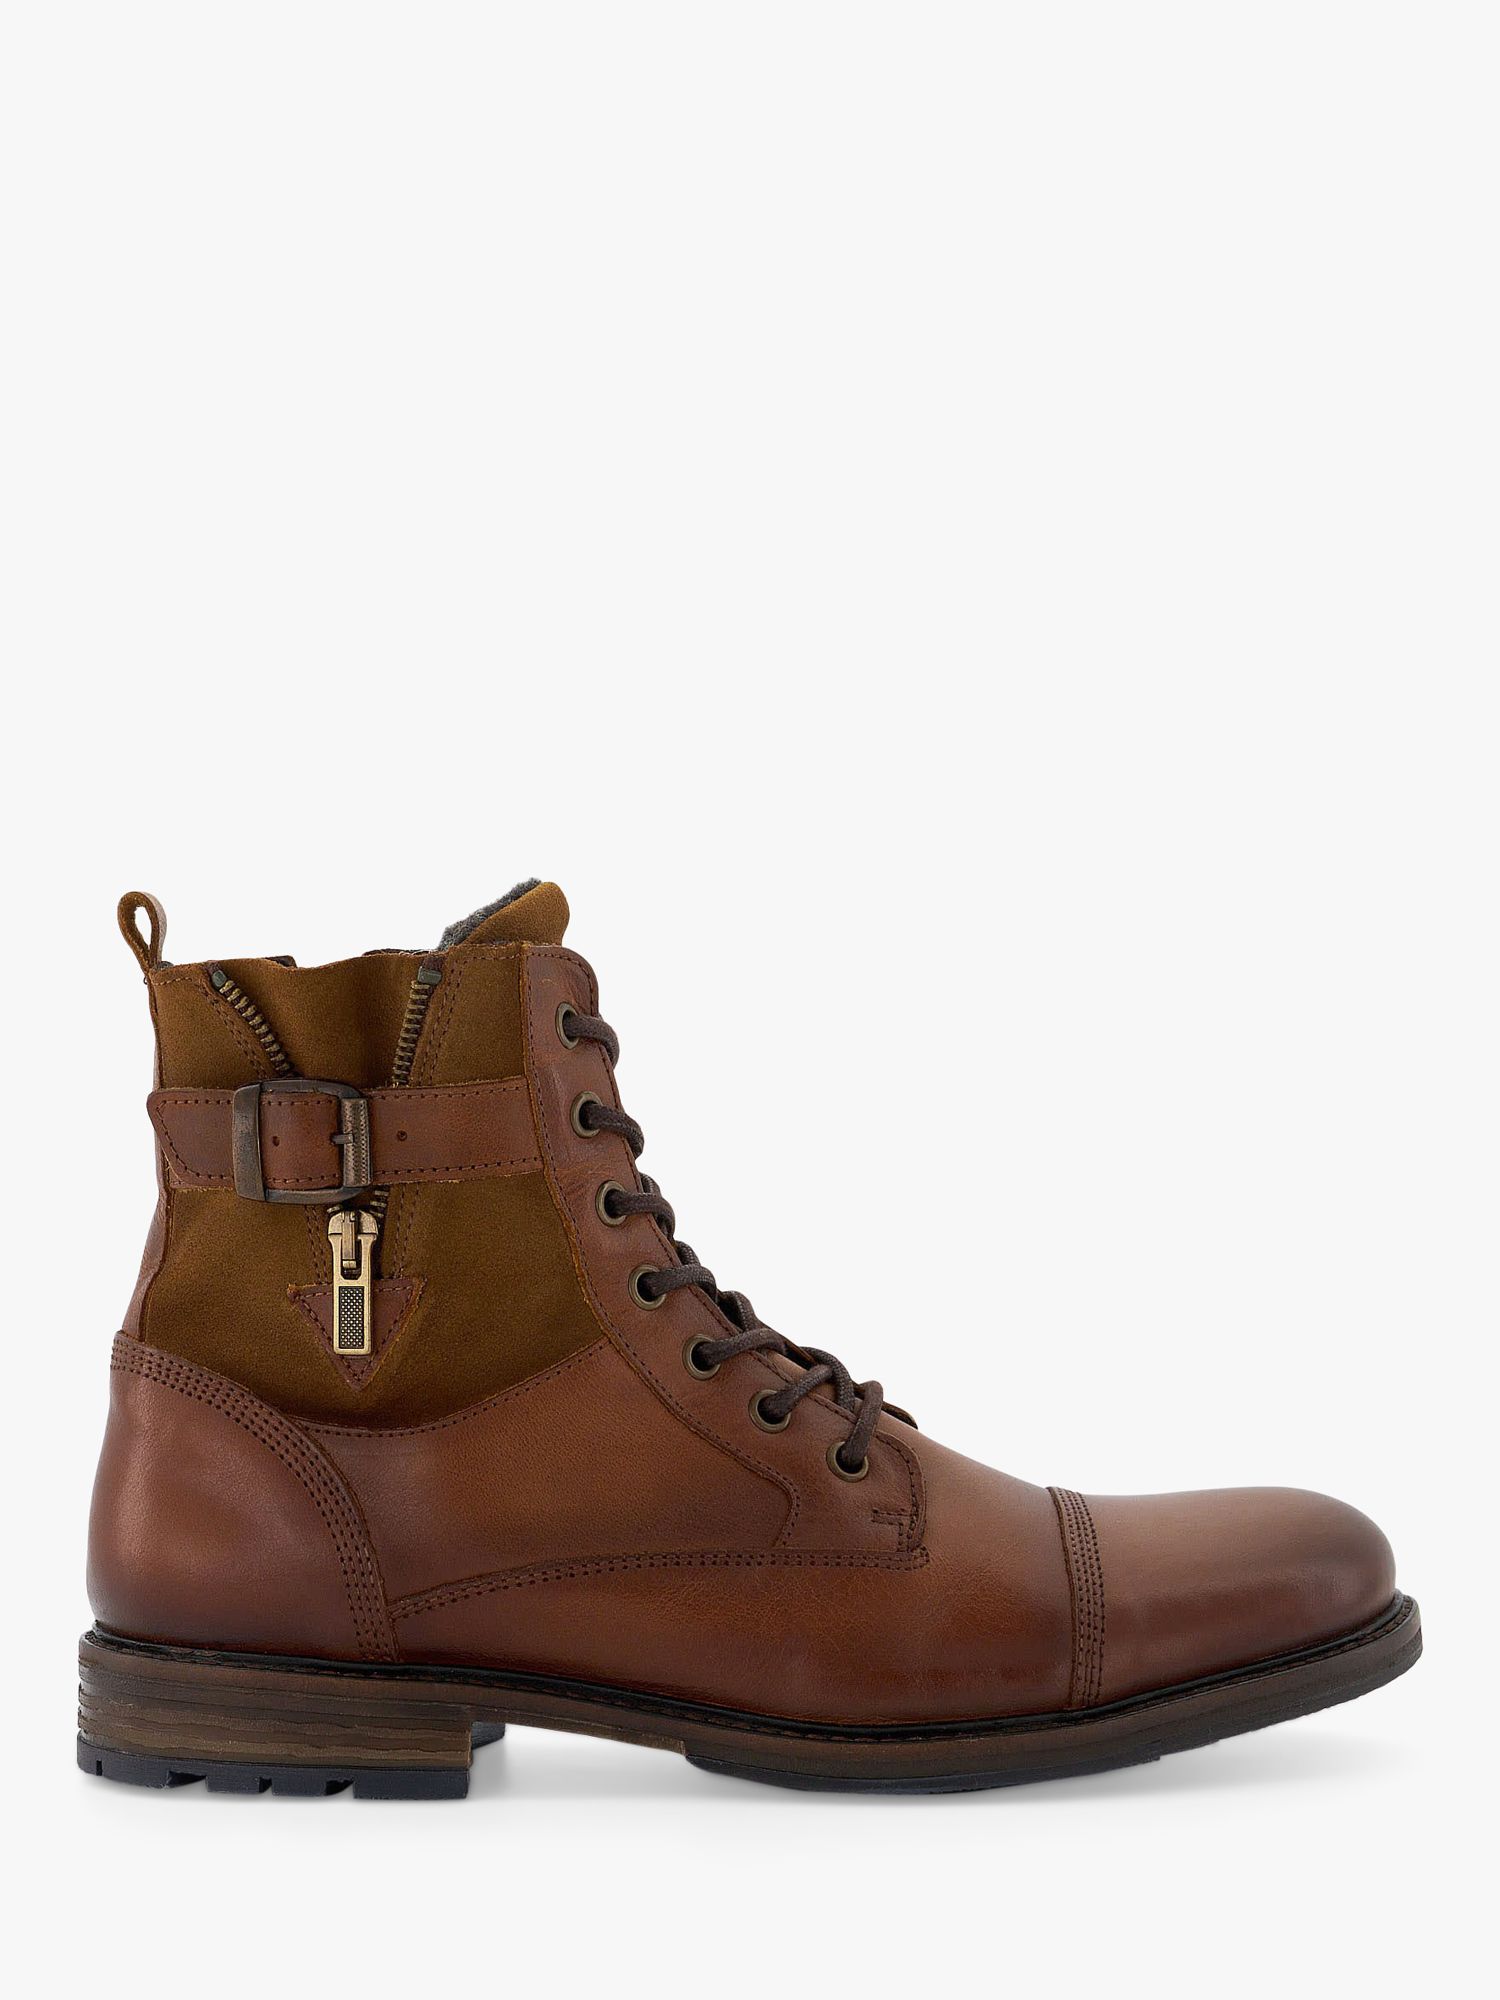 Dune Call Leather Ankle Boots, Tan at John Lewis & Partners